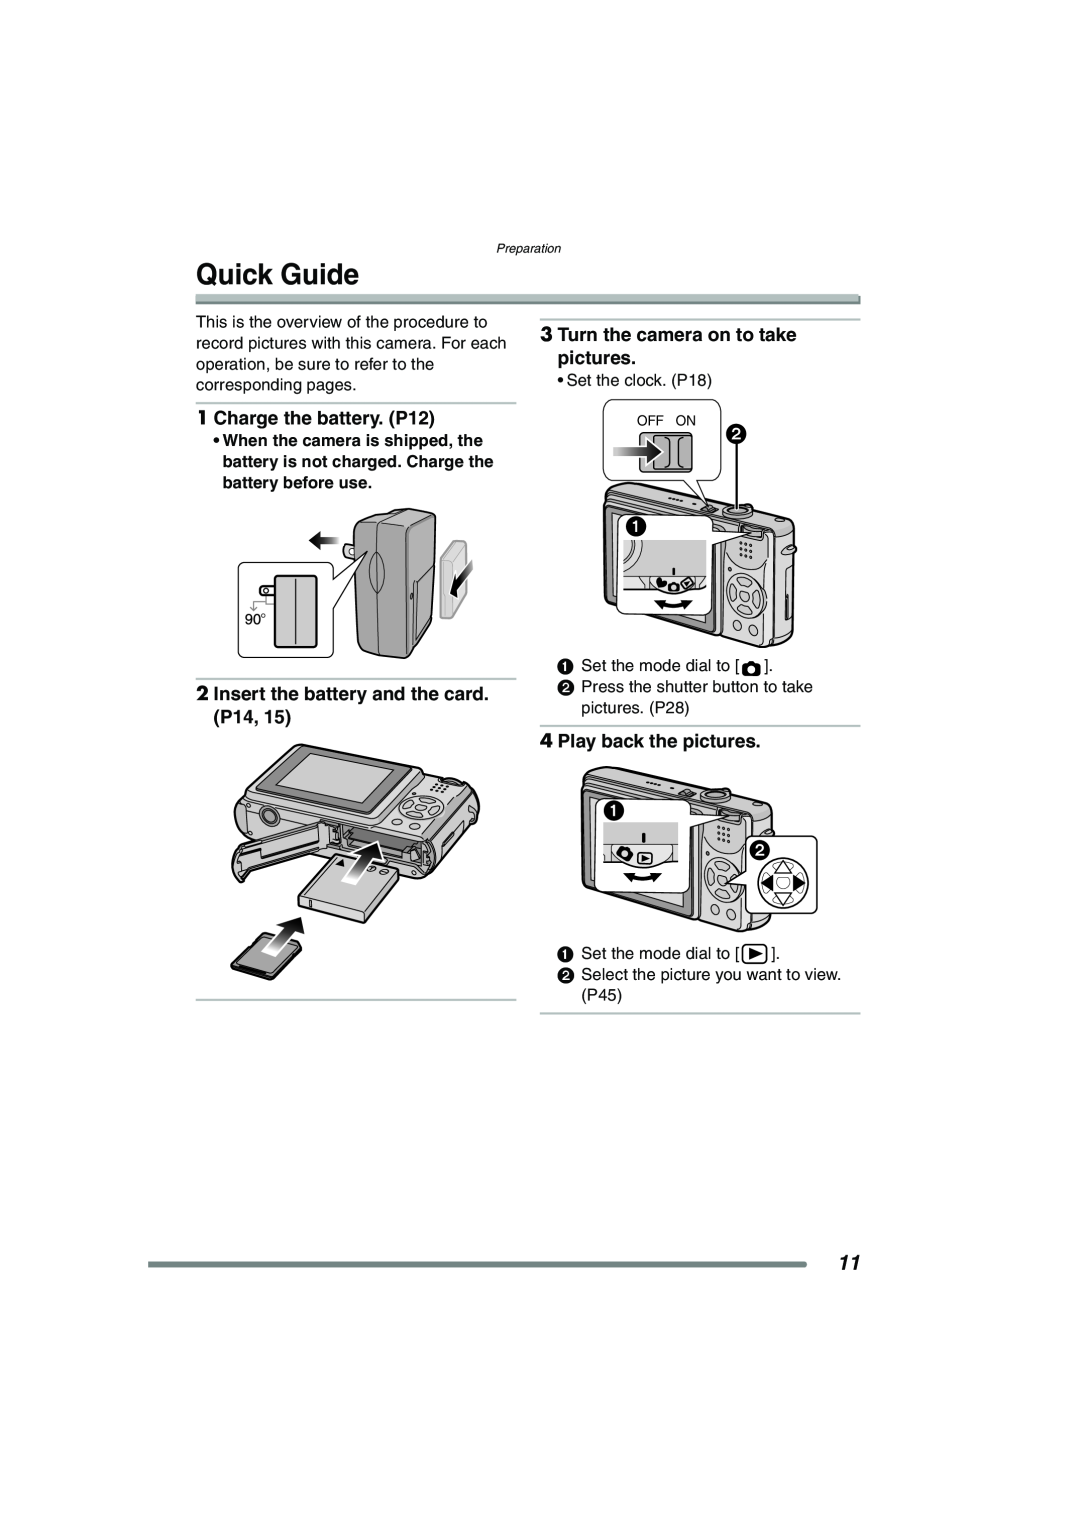 Panasonic DMCFX7 Quick Guide, Charge the battery. P12, Insert the battery and the card. P14, Play back the pictures 